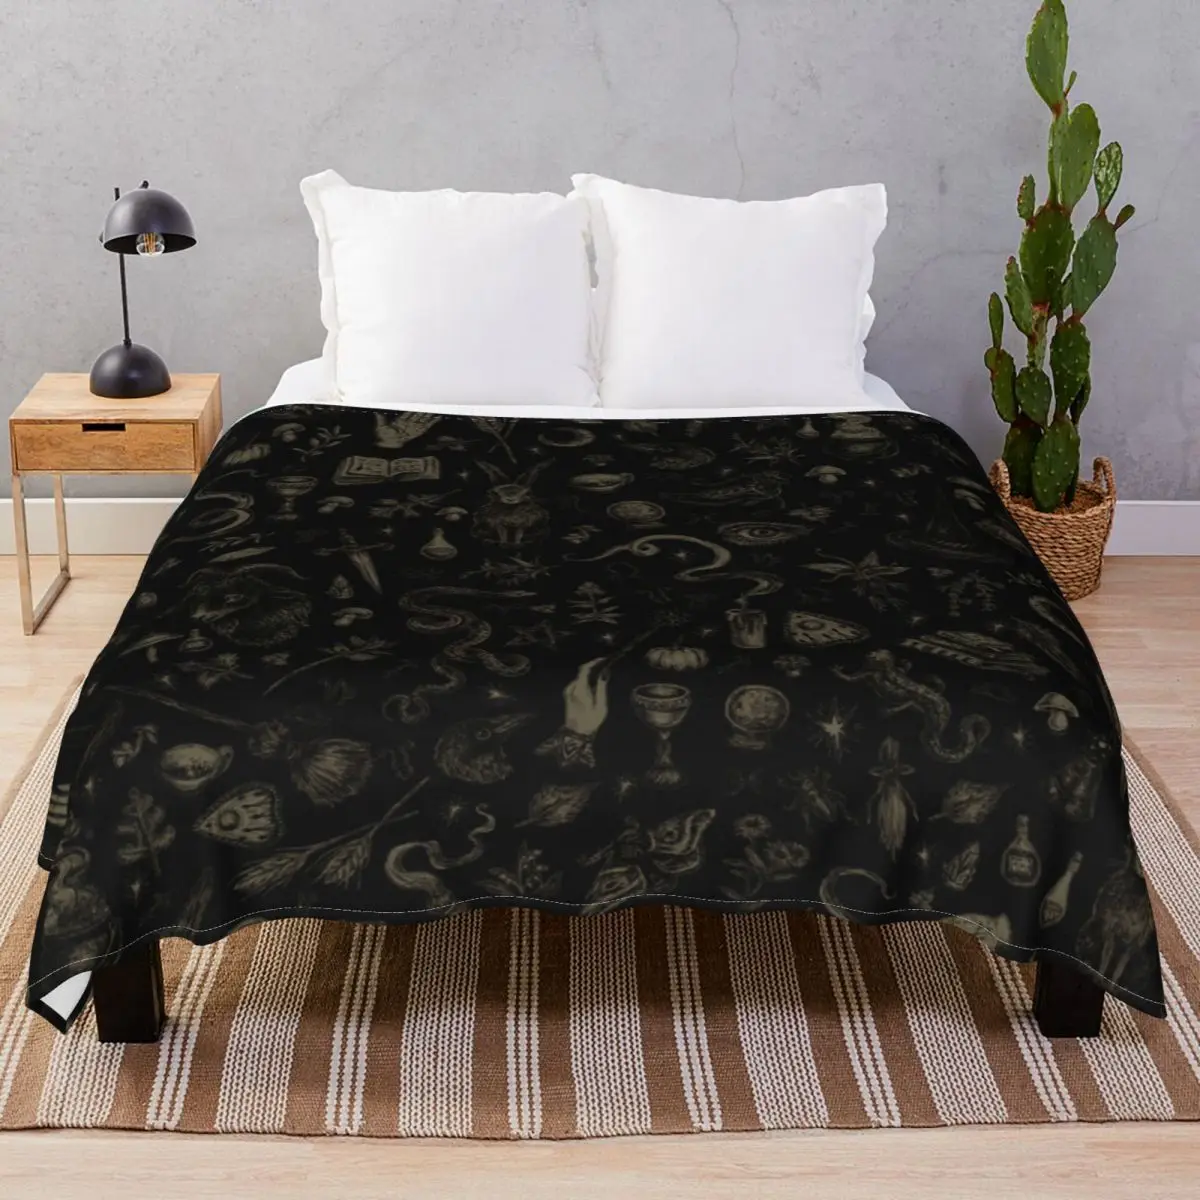 Just Witch Things Black And Beige Blanket Flannel Winter Breathable Throw Blankets for Bed Sofa Camp Cinema